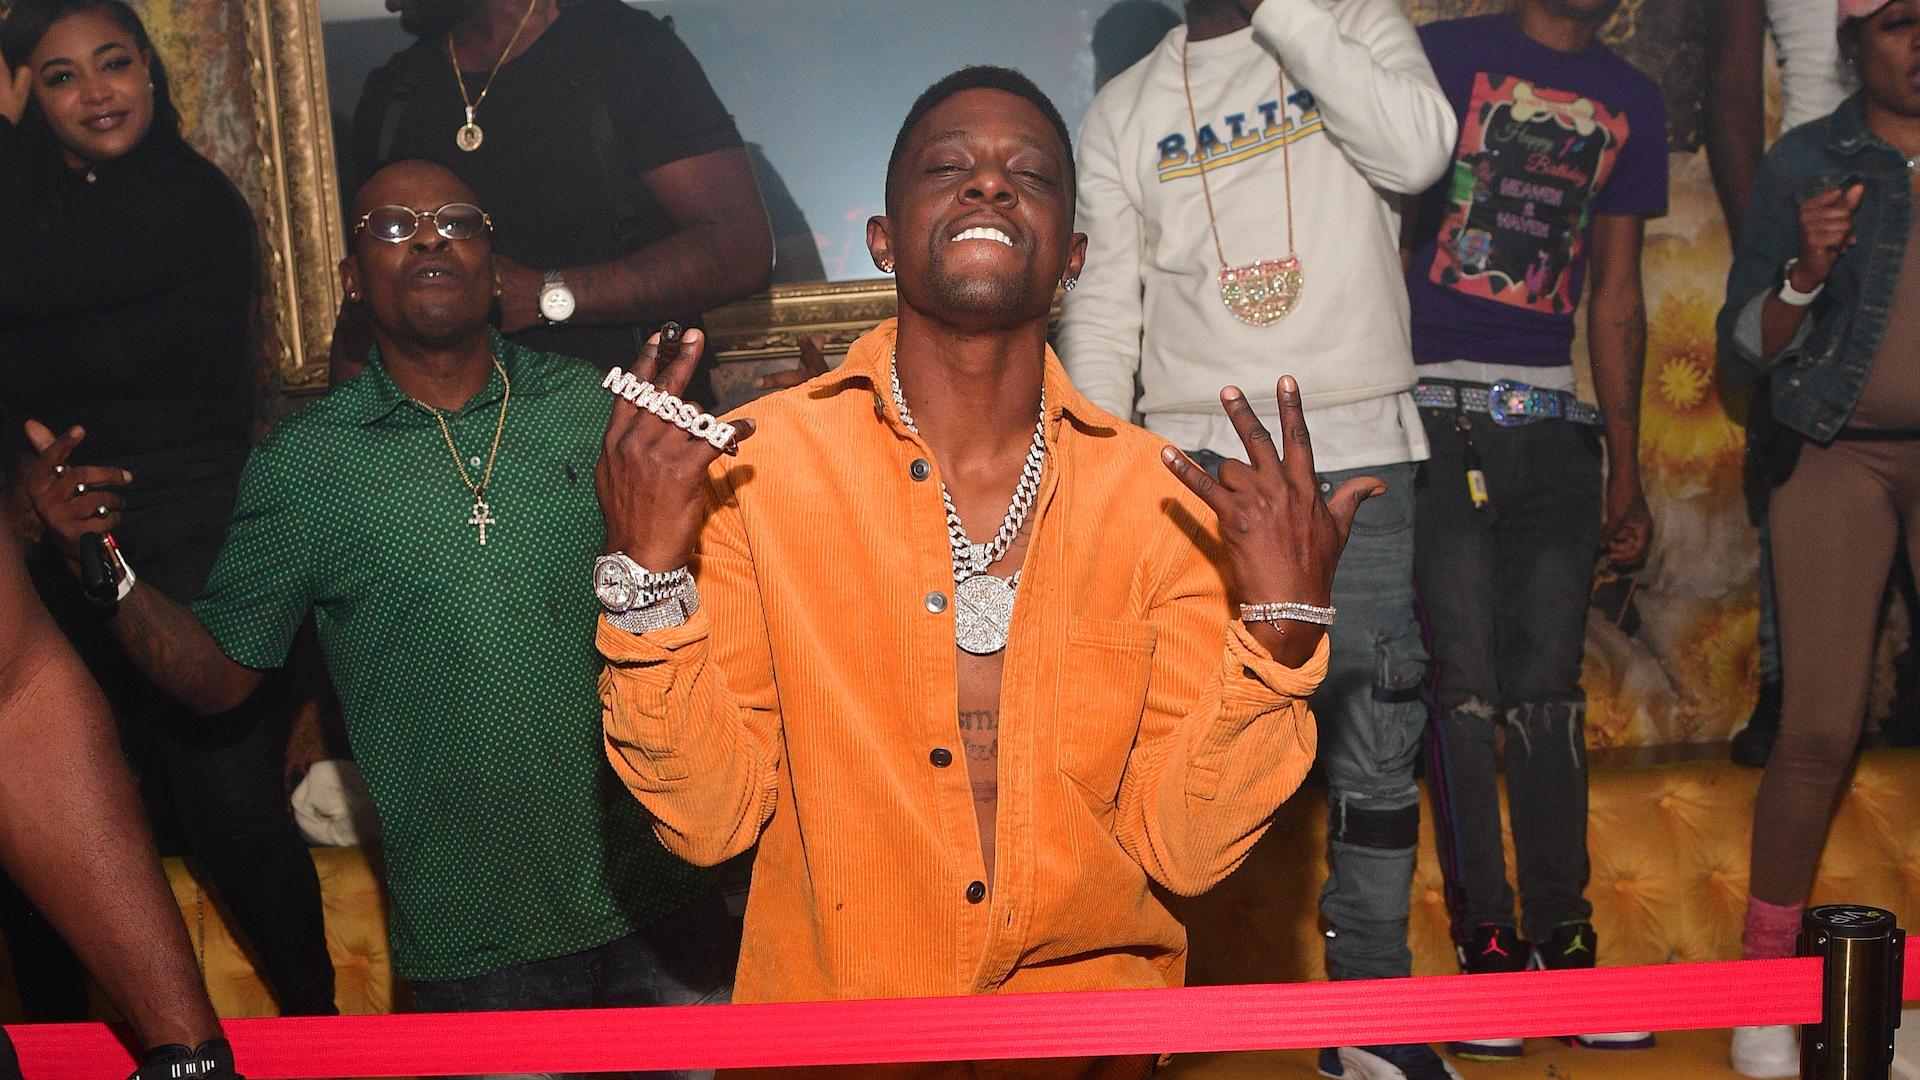 Yung Bleu Gifts Boosie Badazz $100K for Continued Support Amid Music Success